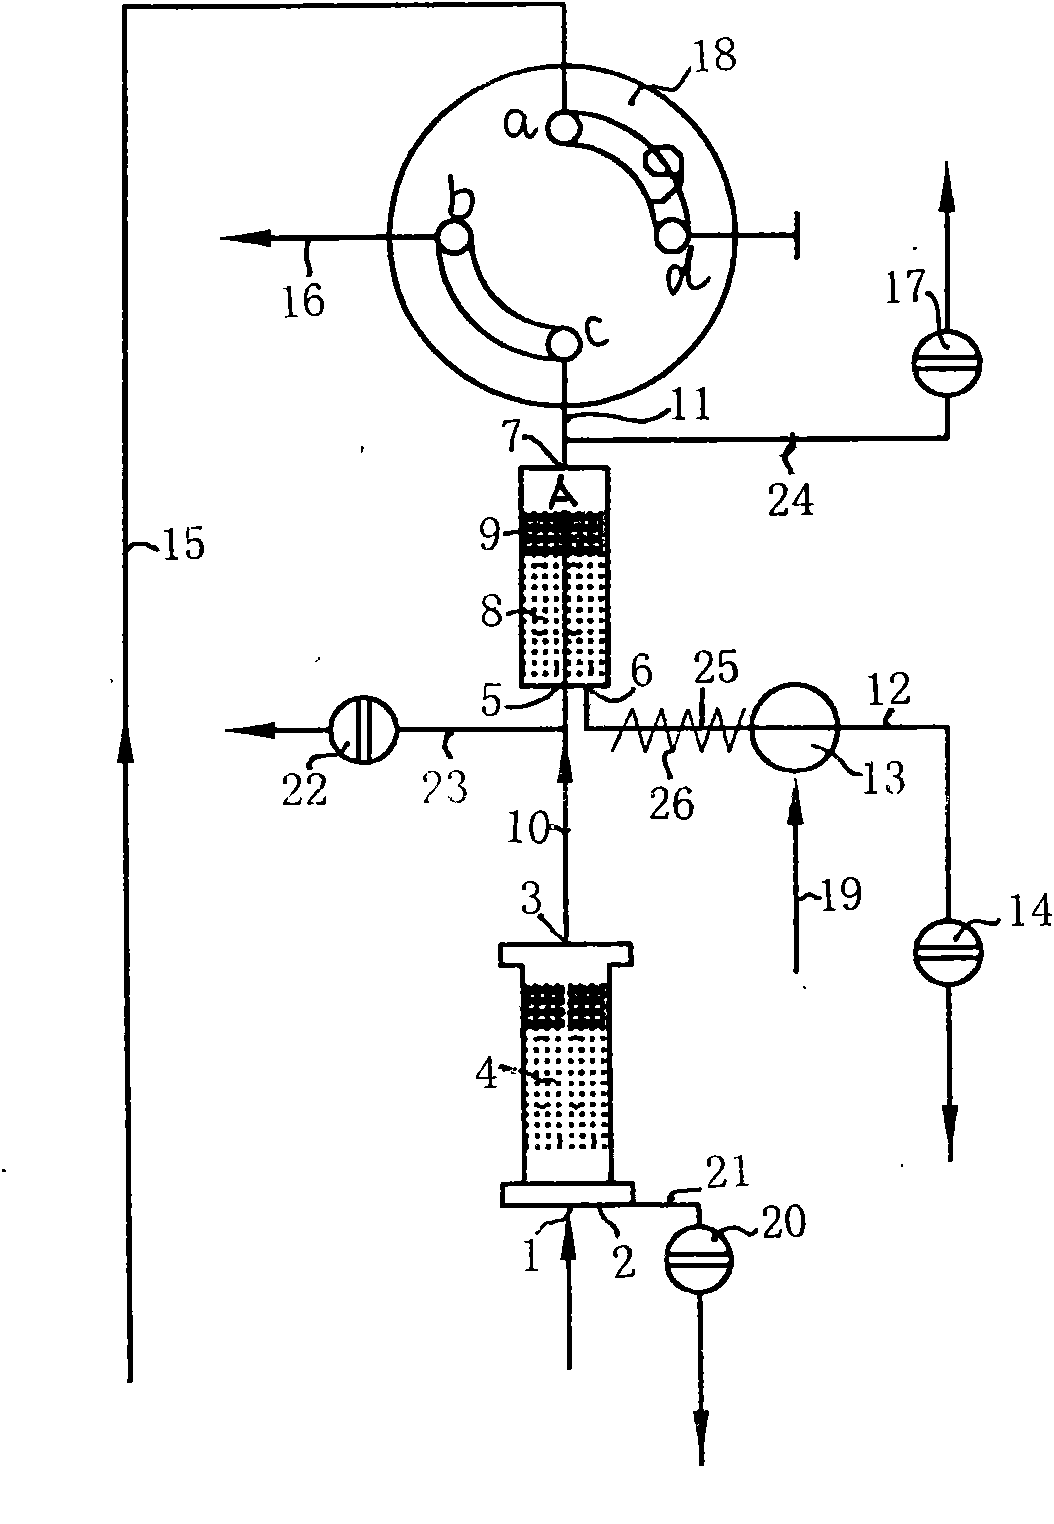 Automatic thermal desorption instrument based on thermal gas desorption